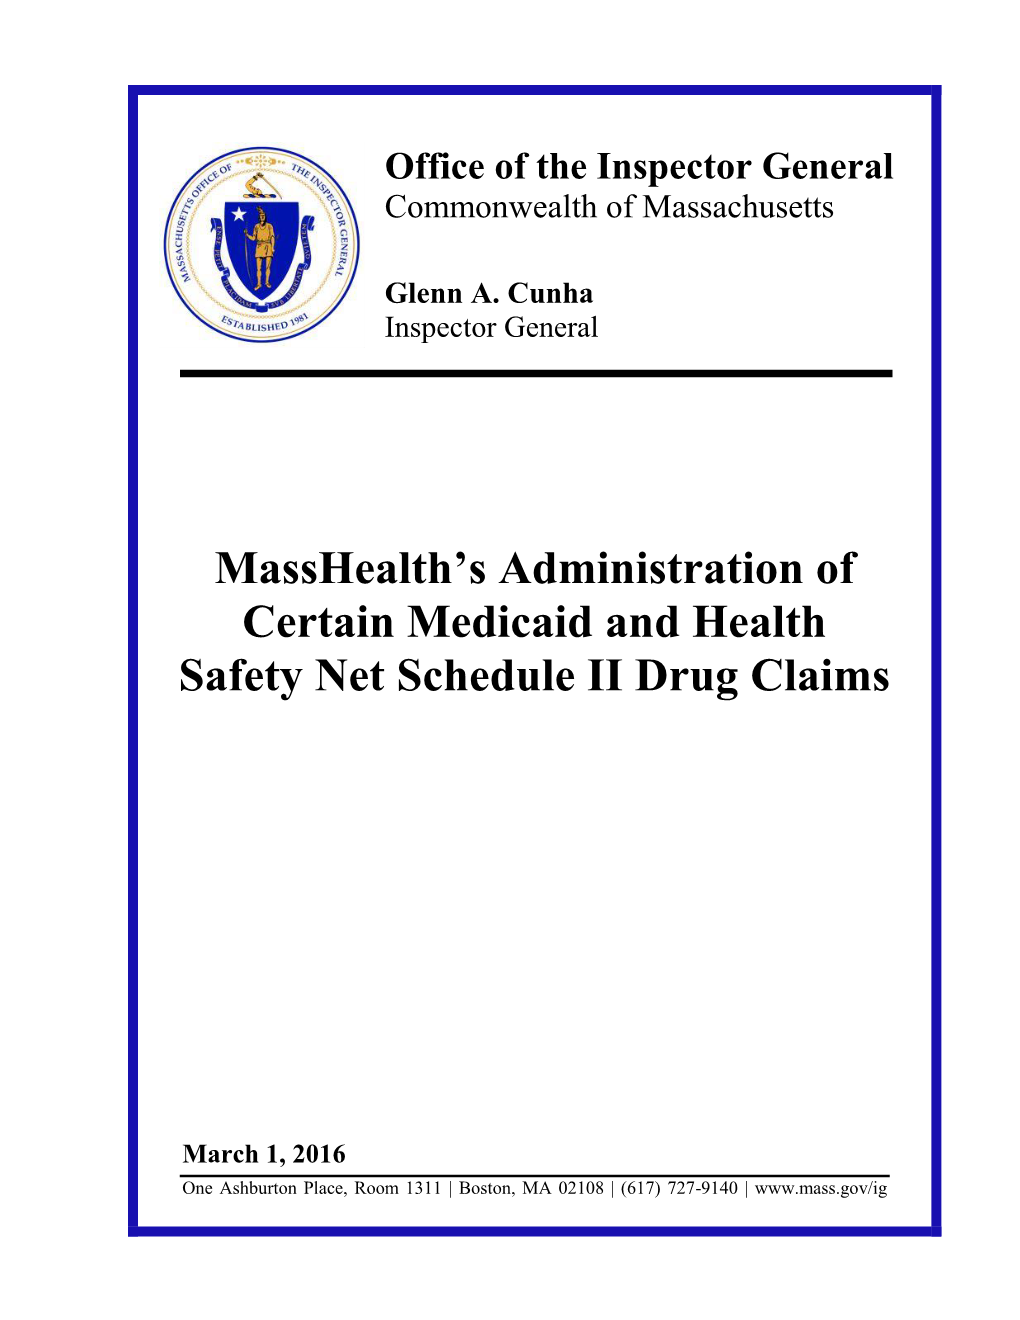 Masshealth's Administration of Certain Medicaid and Health Safety